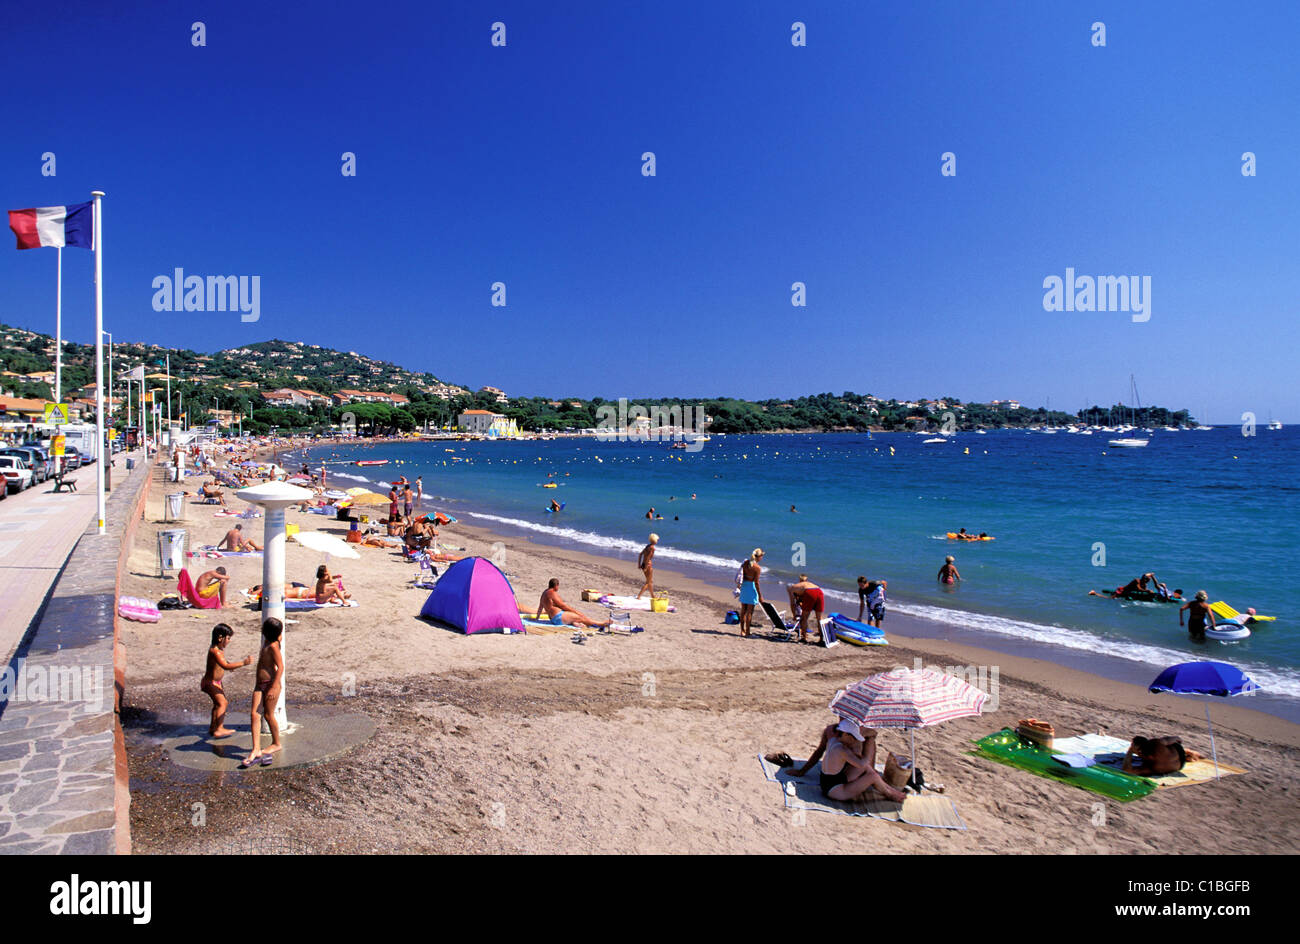 Agay Beach High Resolution Stock Photography and Images - Alamy